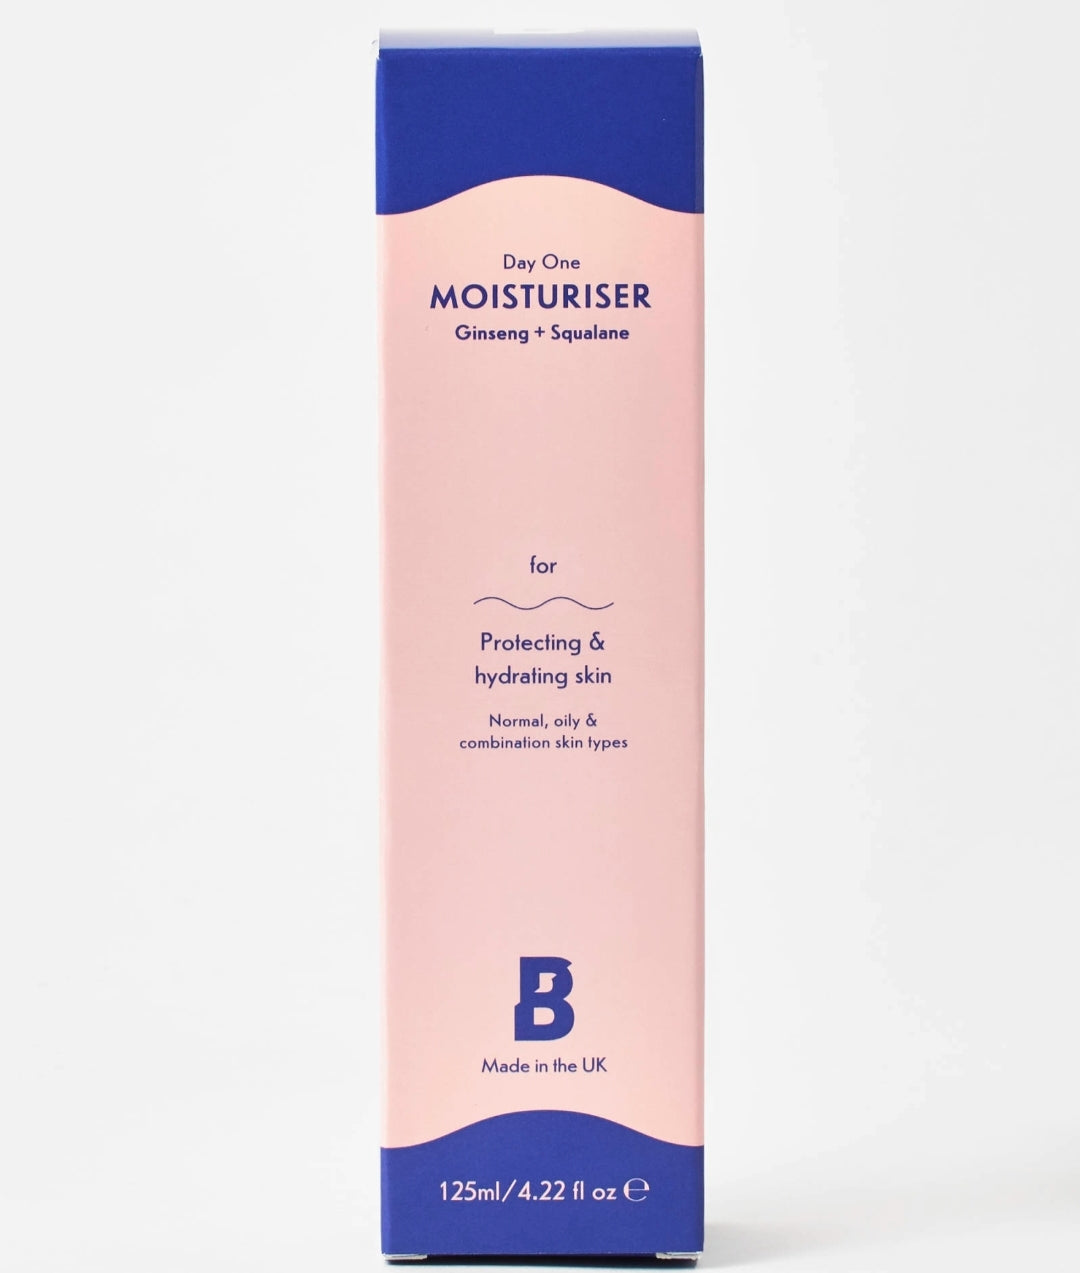 BY BEAUTY BAY

DAY ONE MOISTURISER WITH GINSENG AND SQUALANE